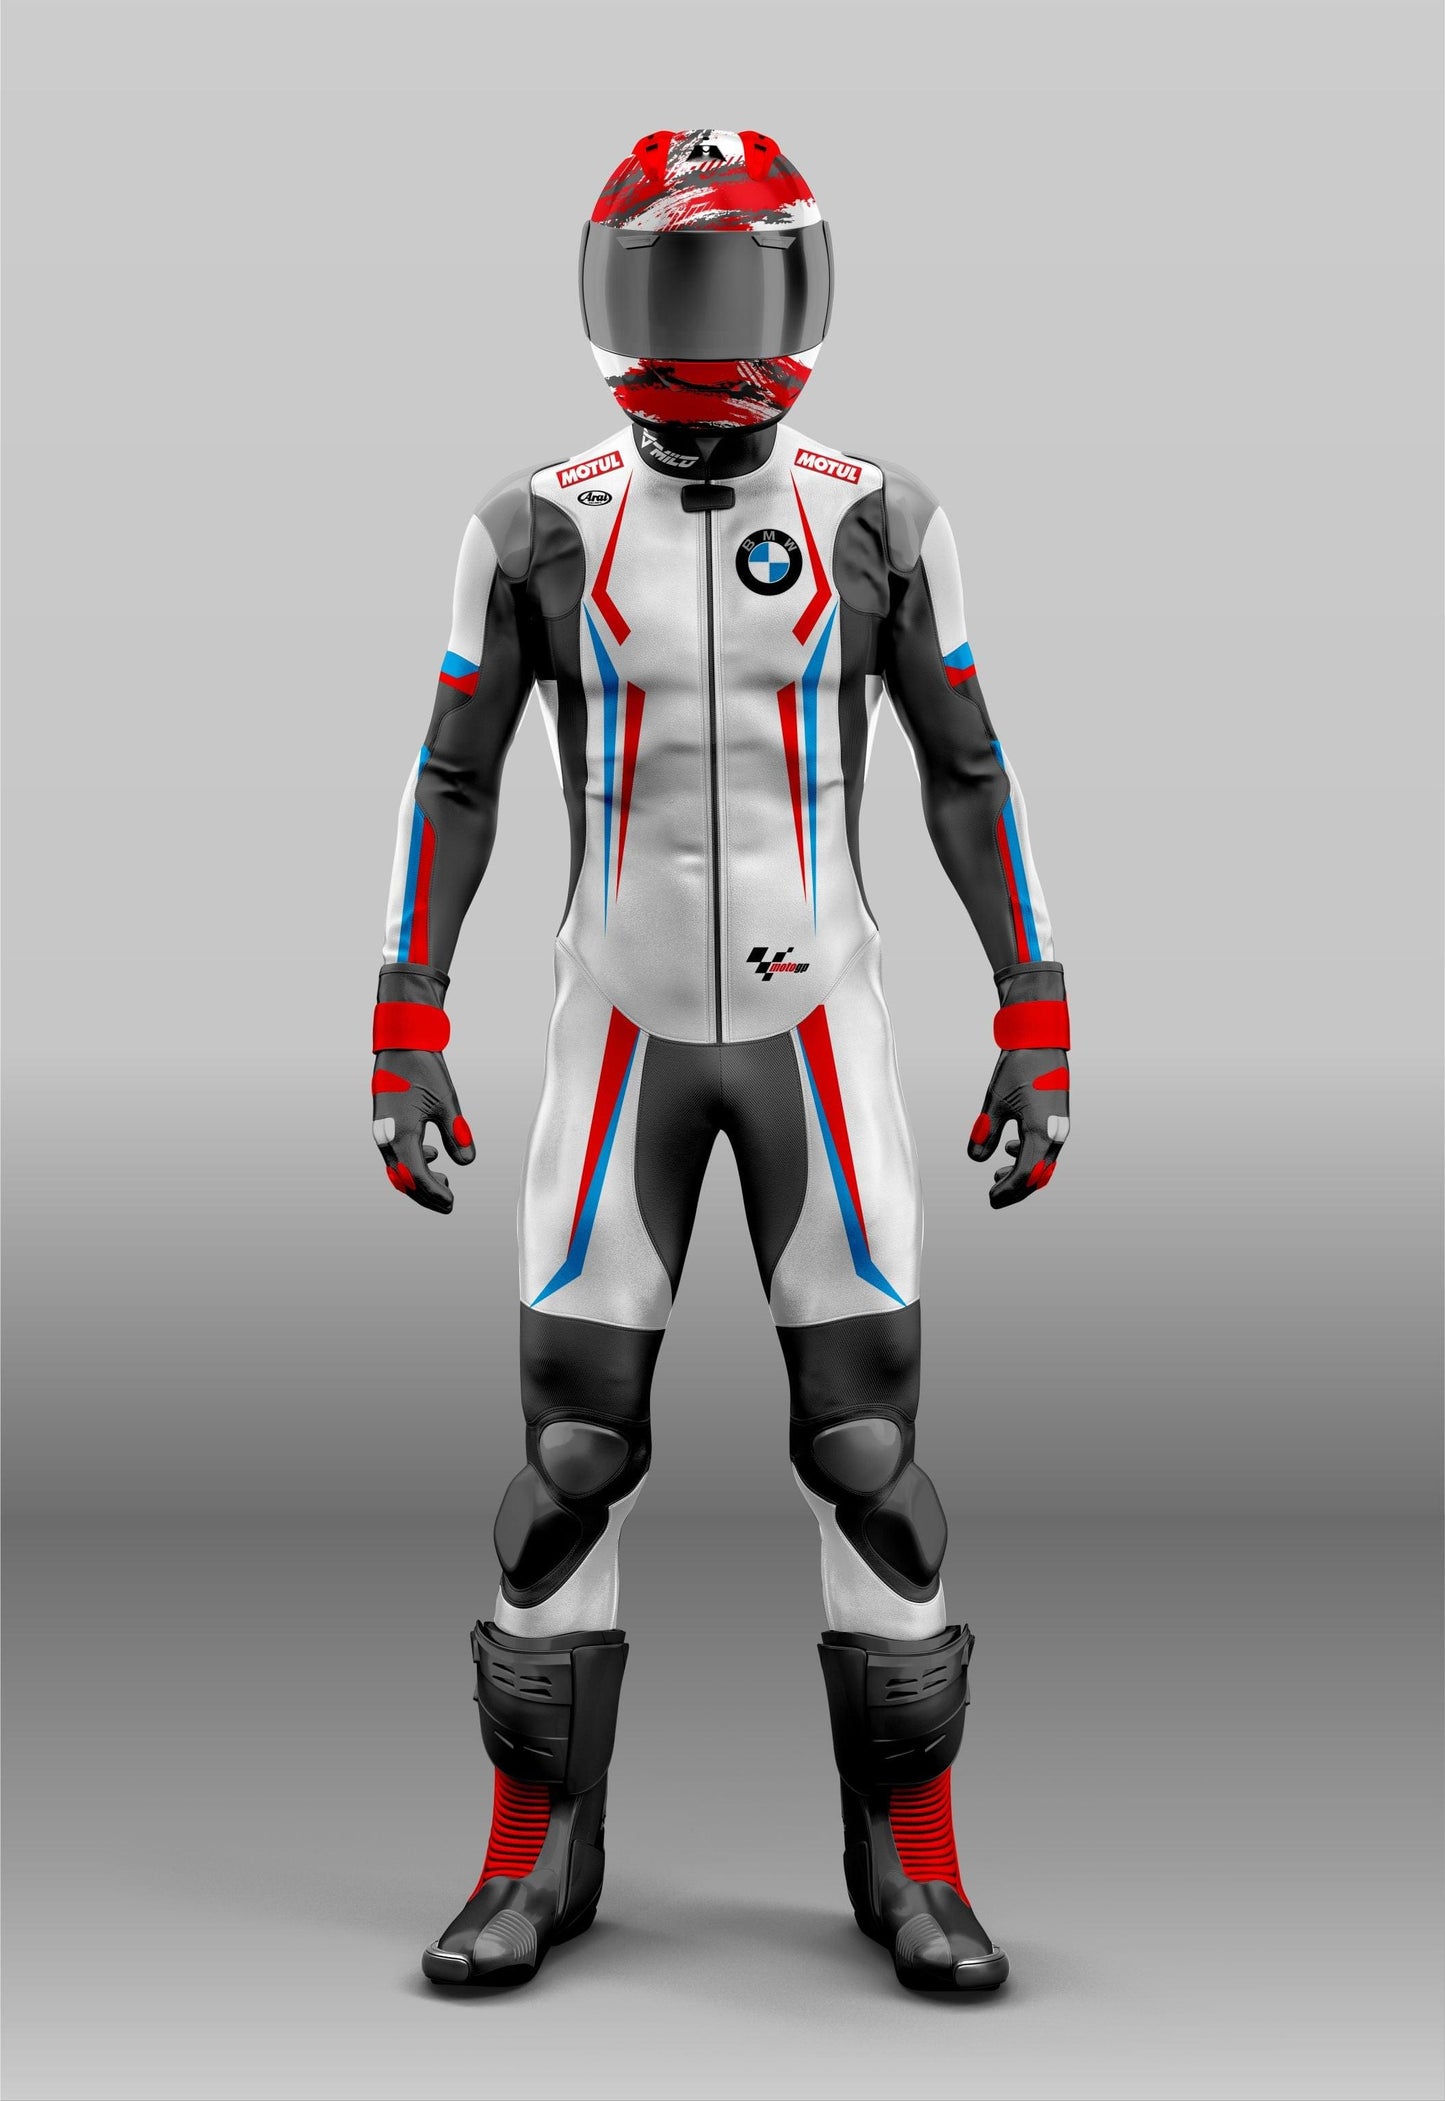 BMW Motorcycle Suits: The Perfect Combination of Functionality, Durability, and Style - Shop Now and Ride with Confidence!